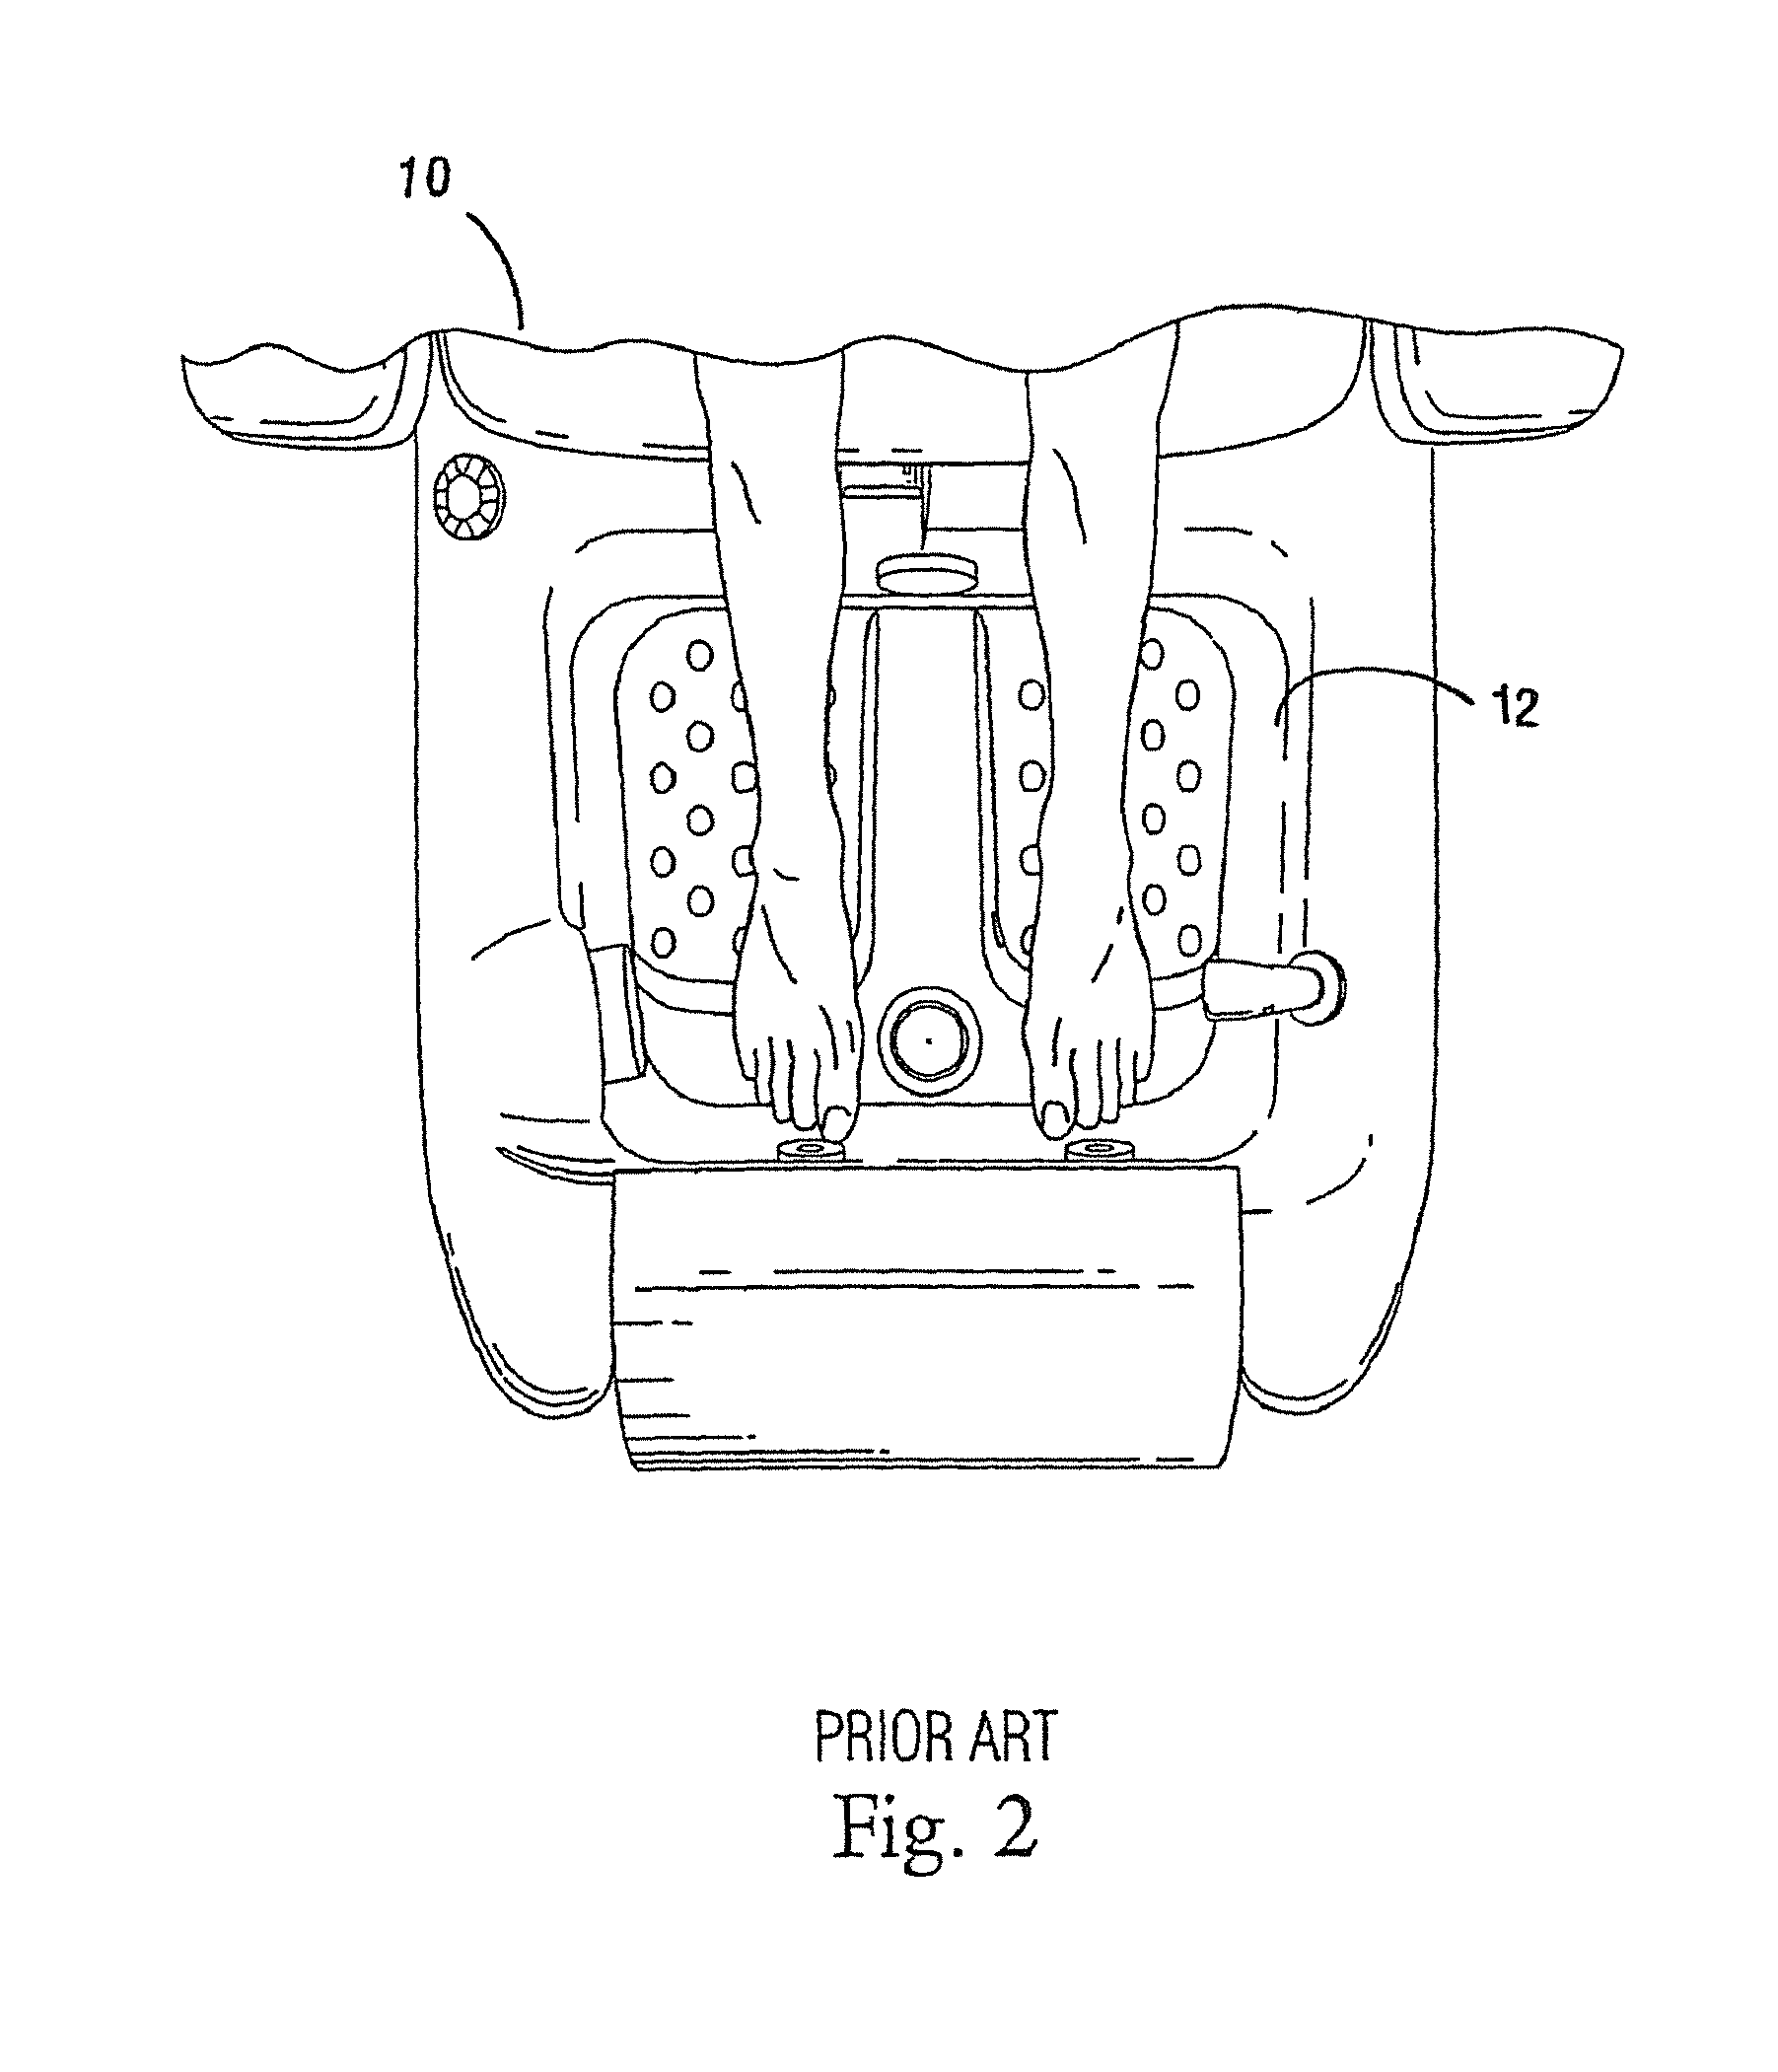 Water jet mechanism for whirlpool effect in pedicures or other applications